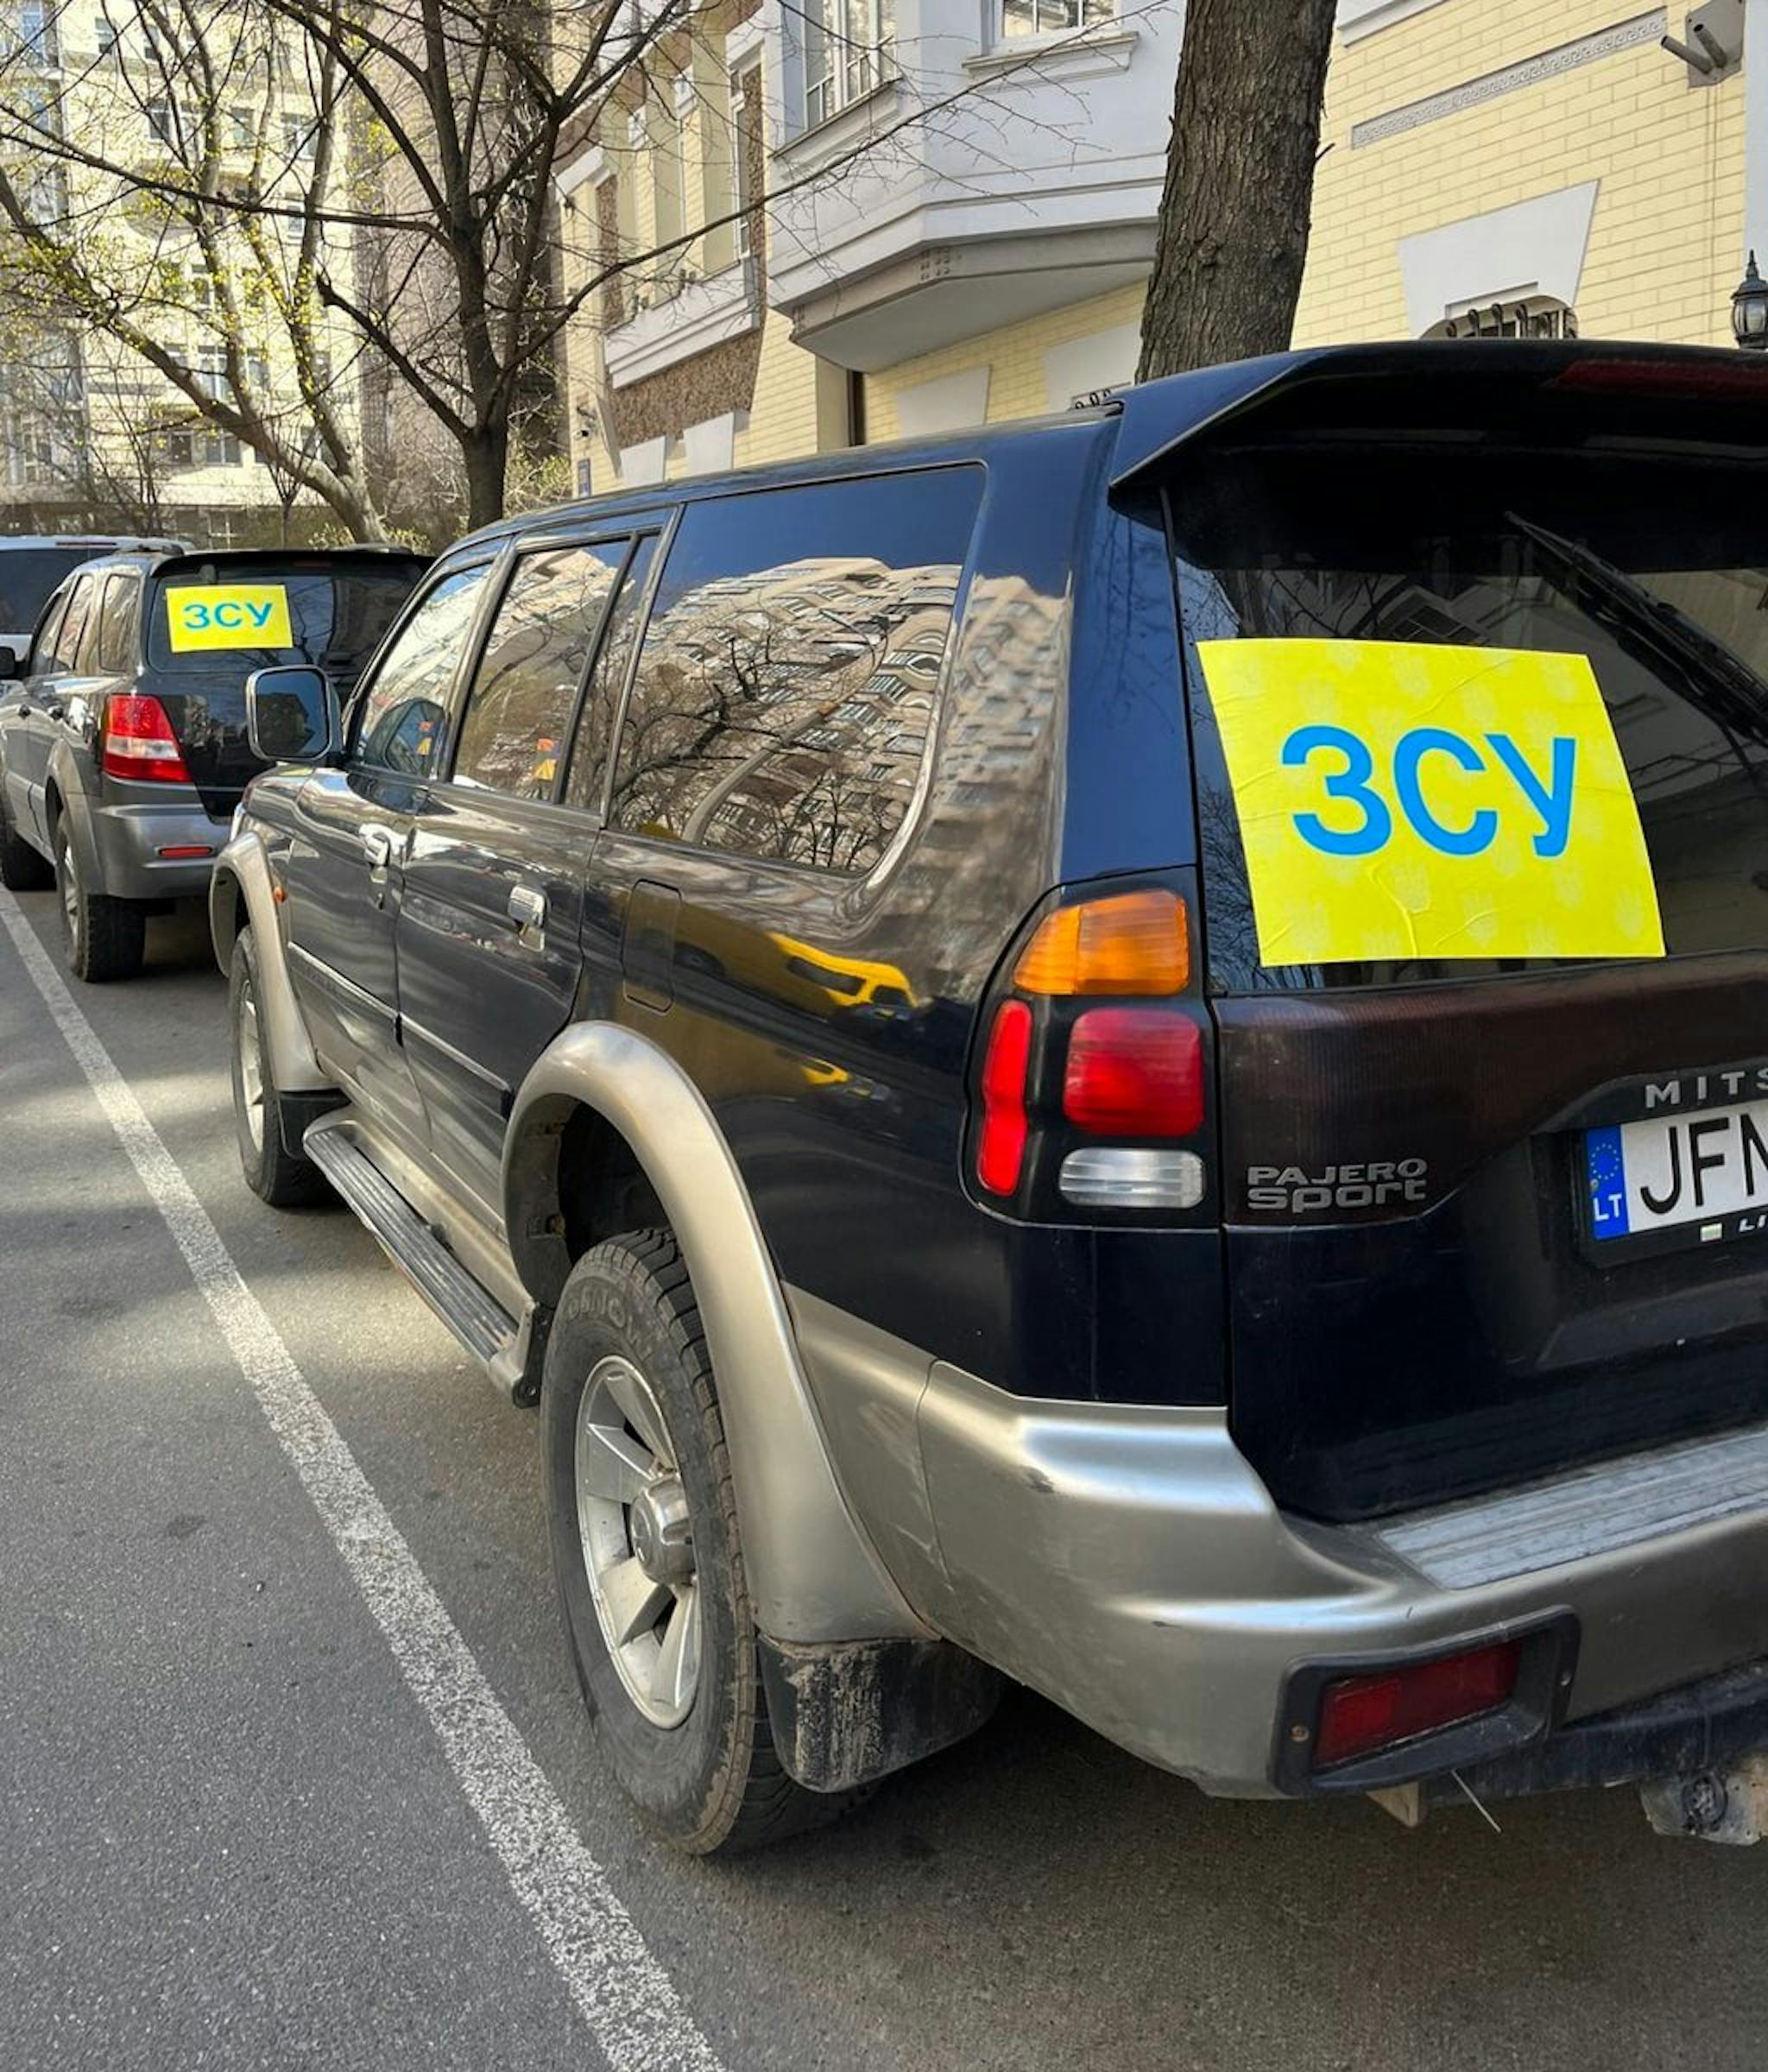 Since the first days of the war, Ukrainian businesses have been supporting the military by purchasing vehicles for the needs of the armed forces of Ukraine, as well as buying medicines for military hospitals and basic necessities for civilians. Photos: Bitmedia.Fund